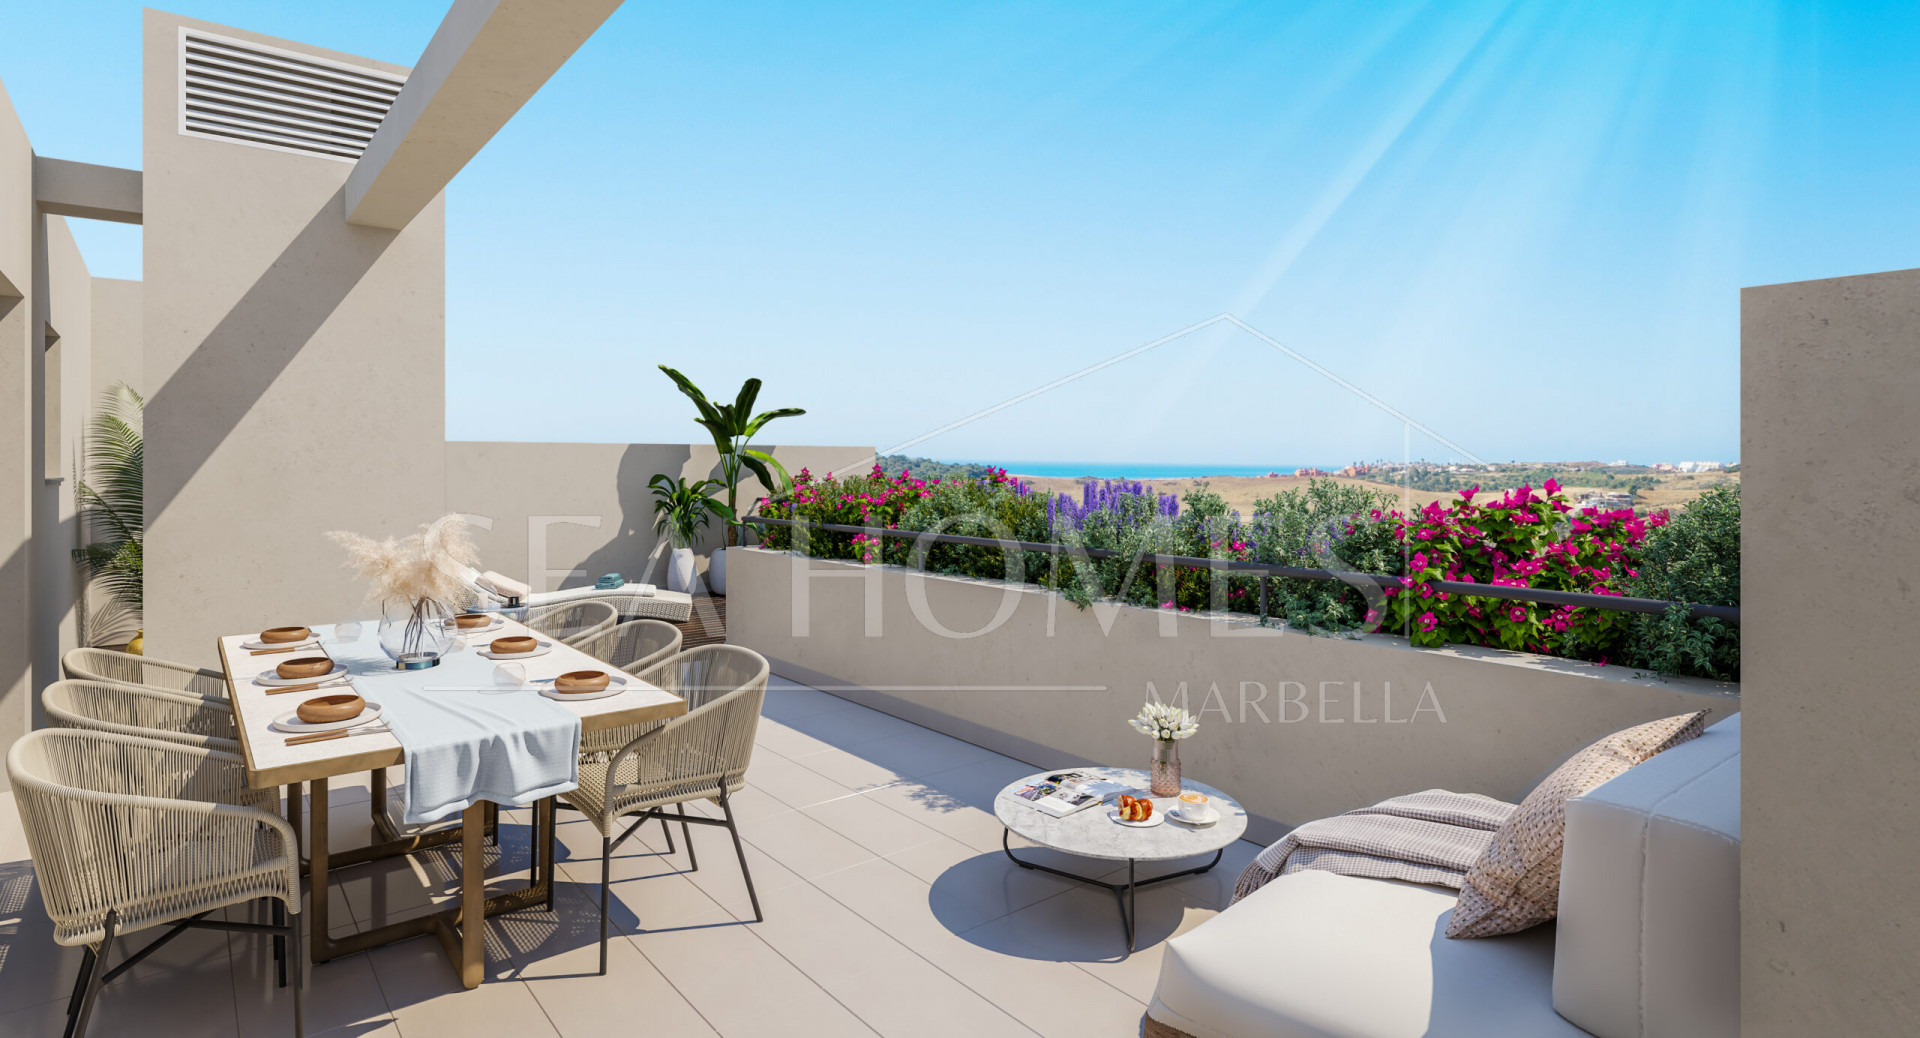 Aby Estepona, apartments and duplex penthouses in a privileged location